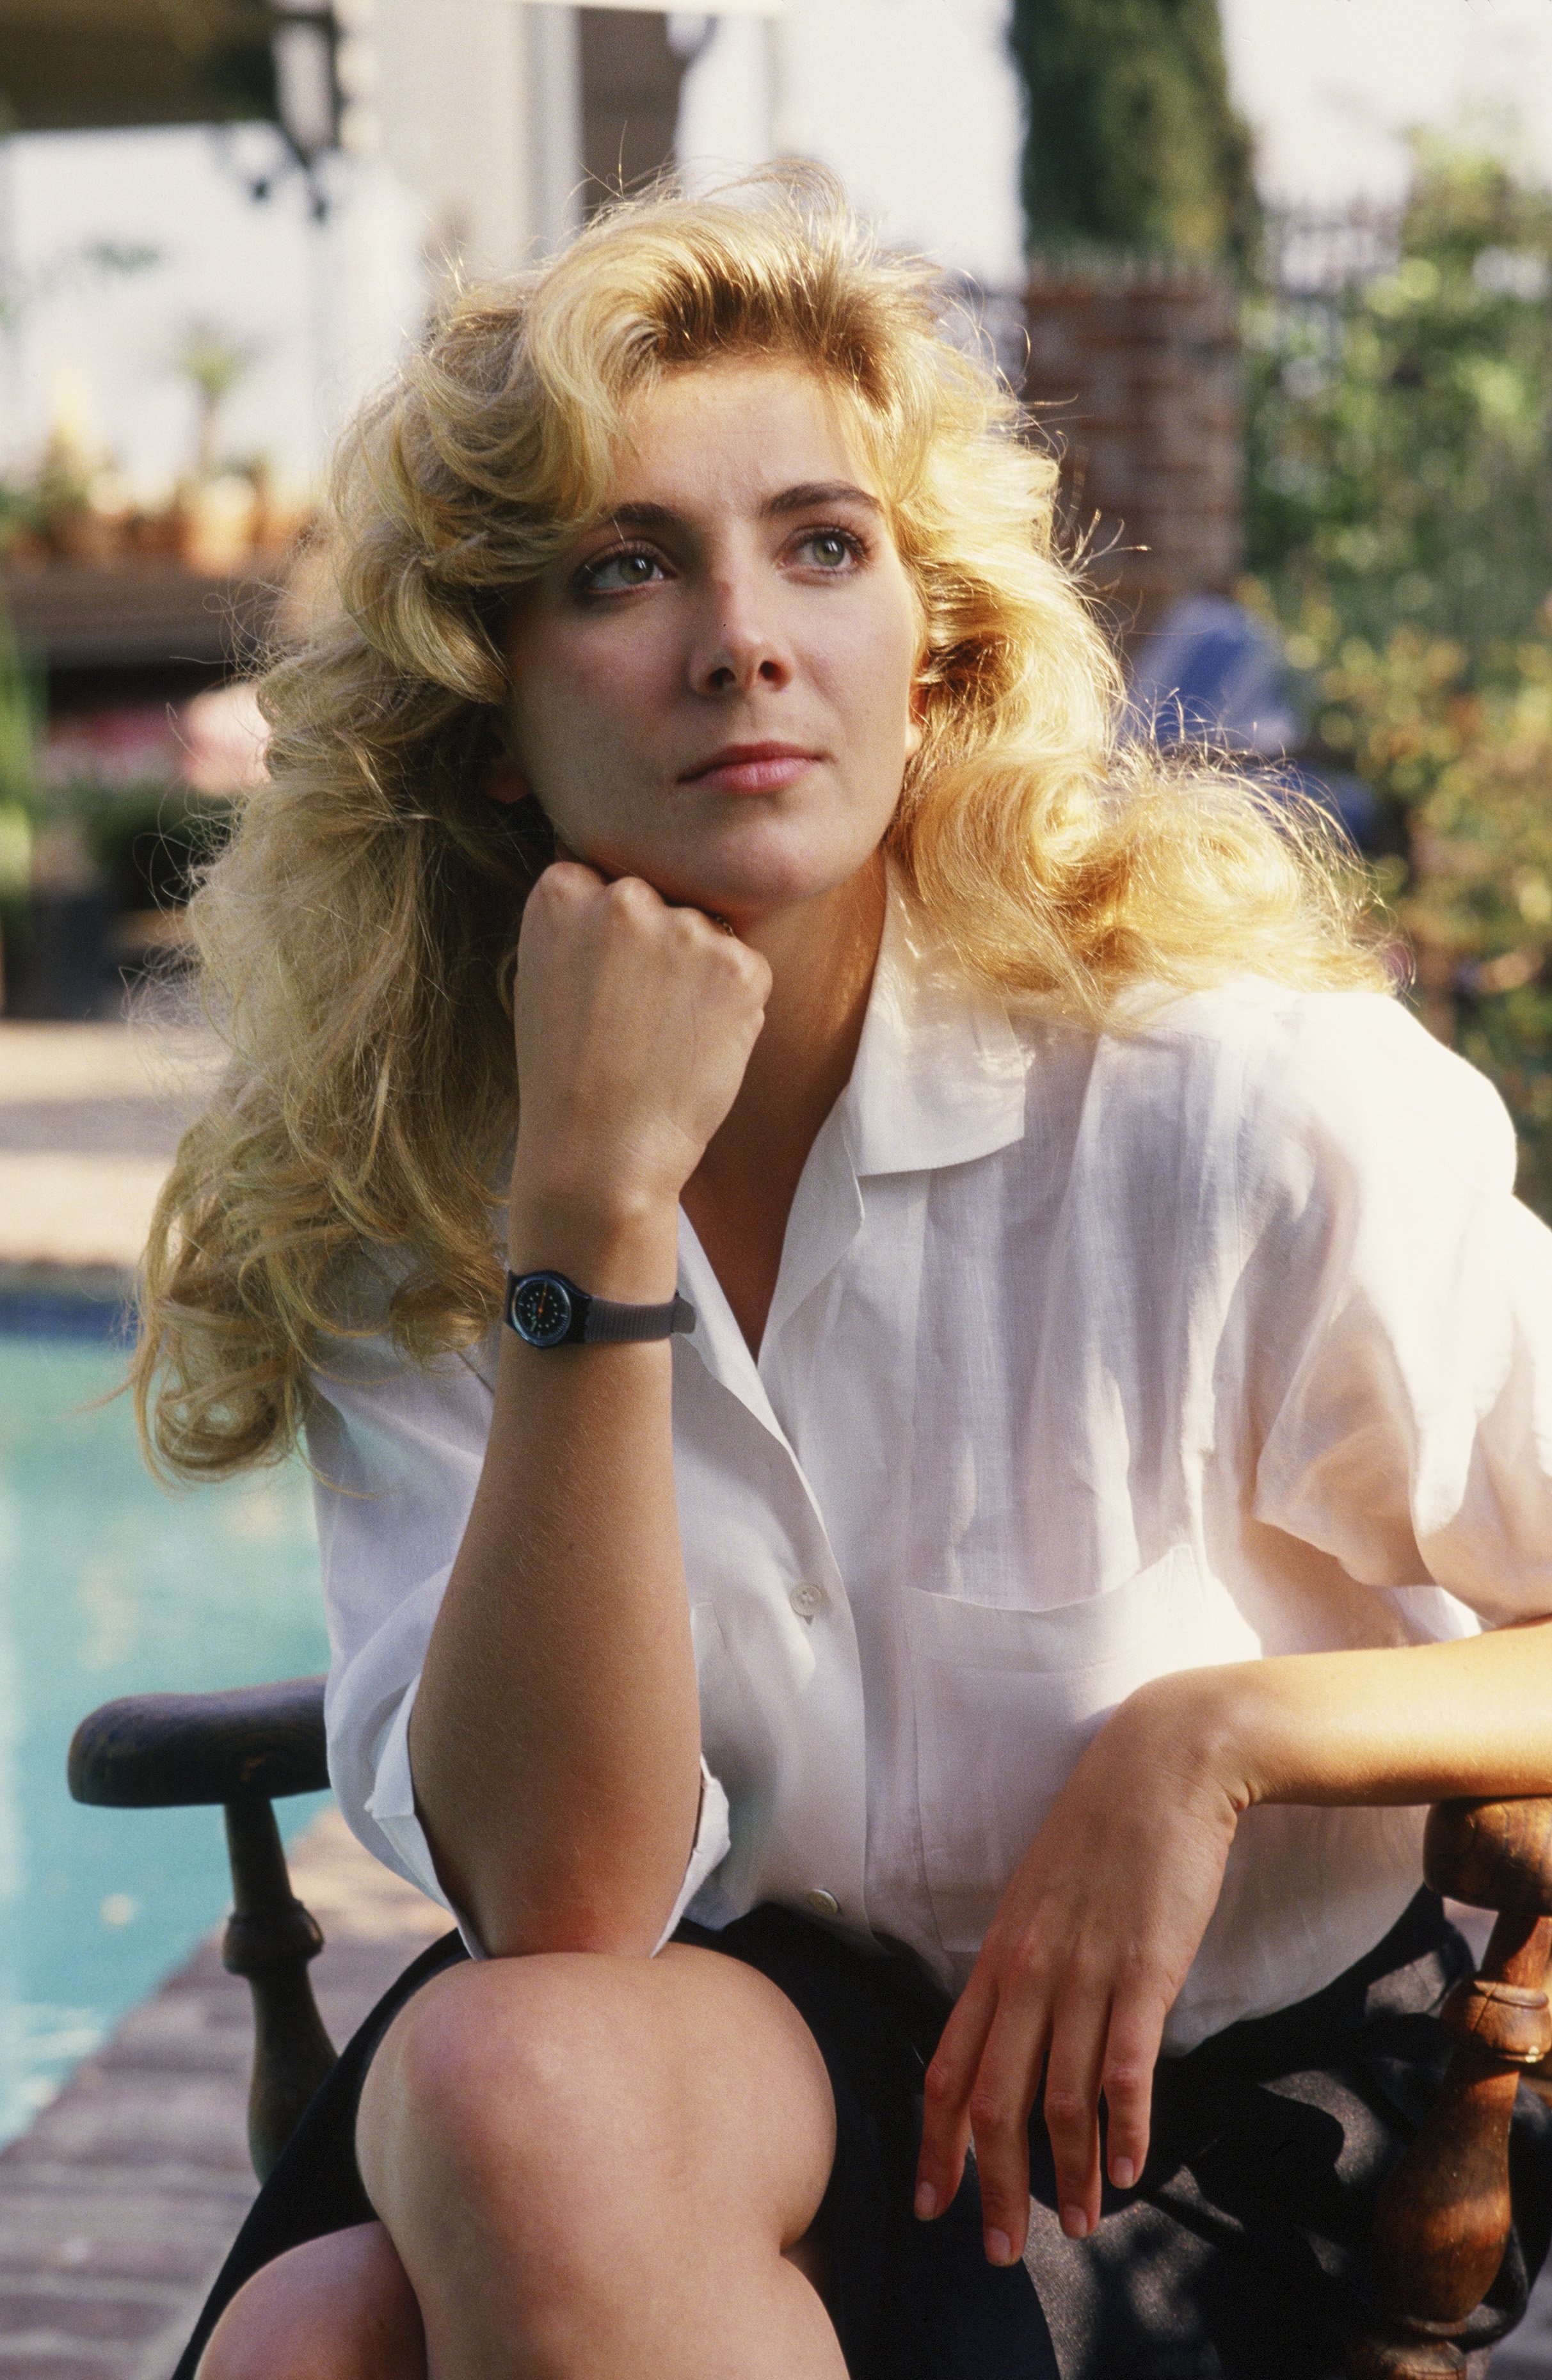 Portrait of Natasha Richardson for the movie "Patty Hearst" in 1988 | Source: Getty Images